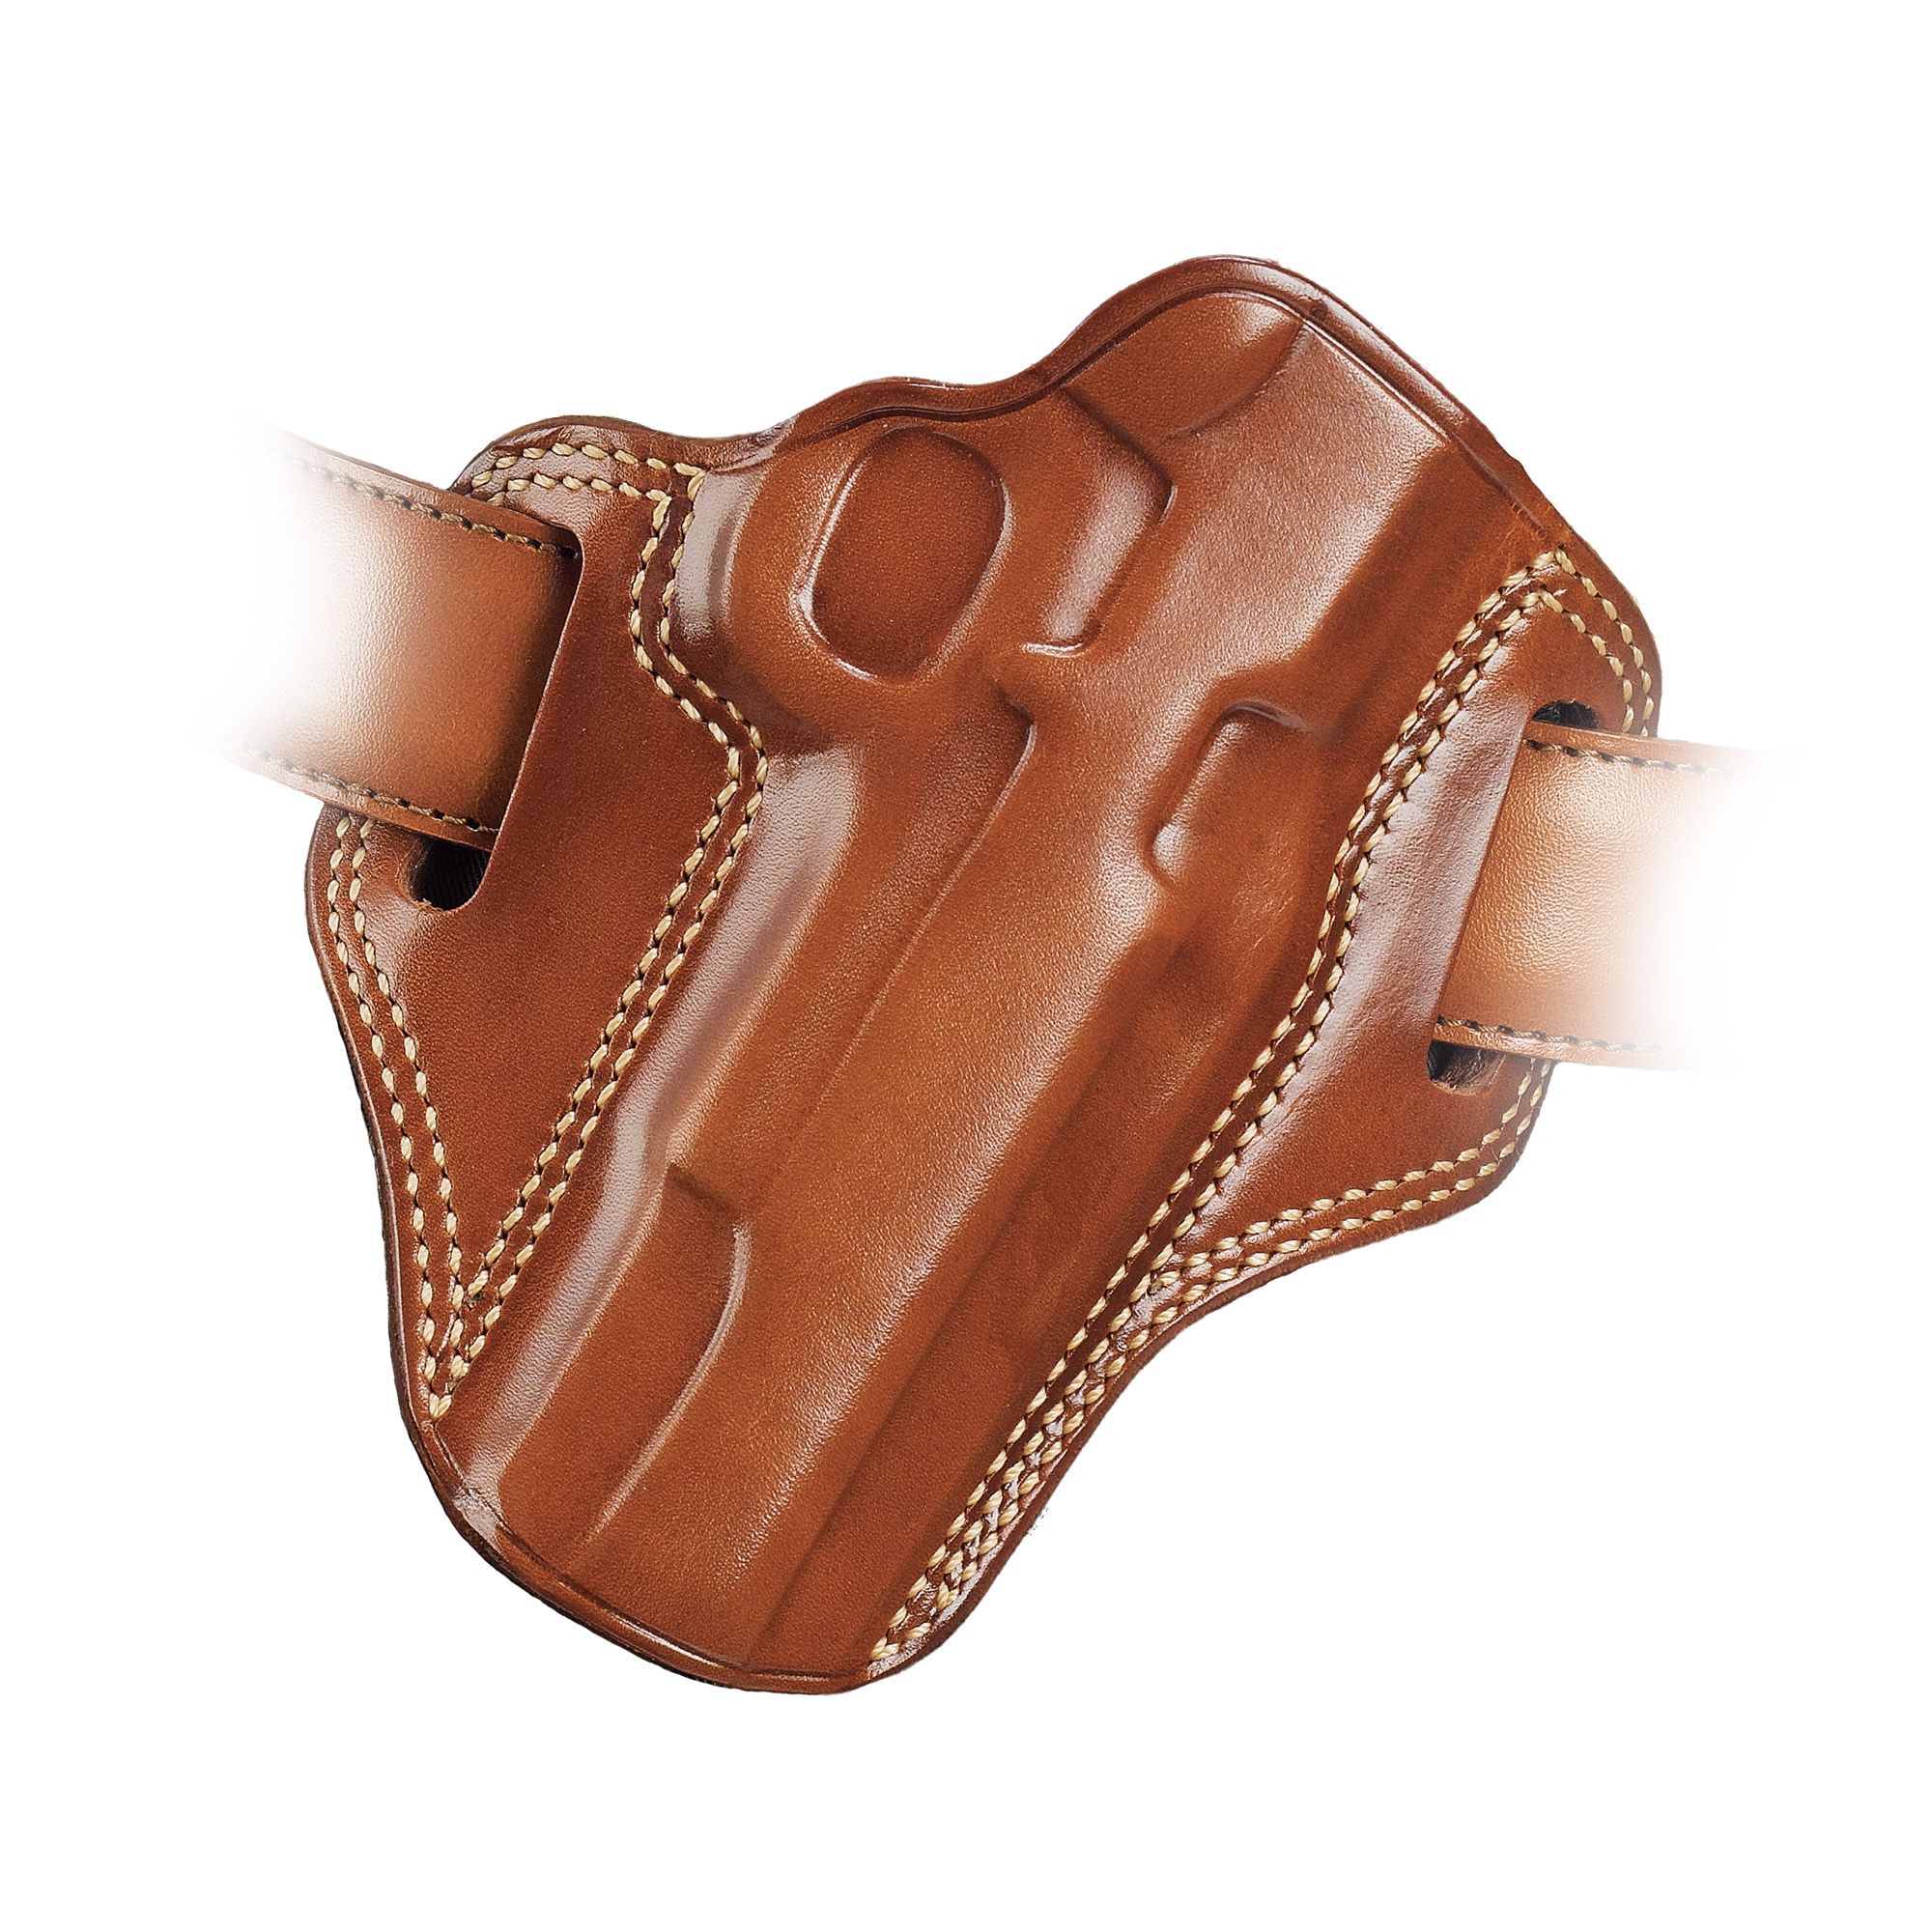 Galco Combat Master Concealment Holster - Right Hand Tan Sig P228/P229: CM250